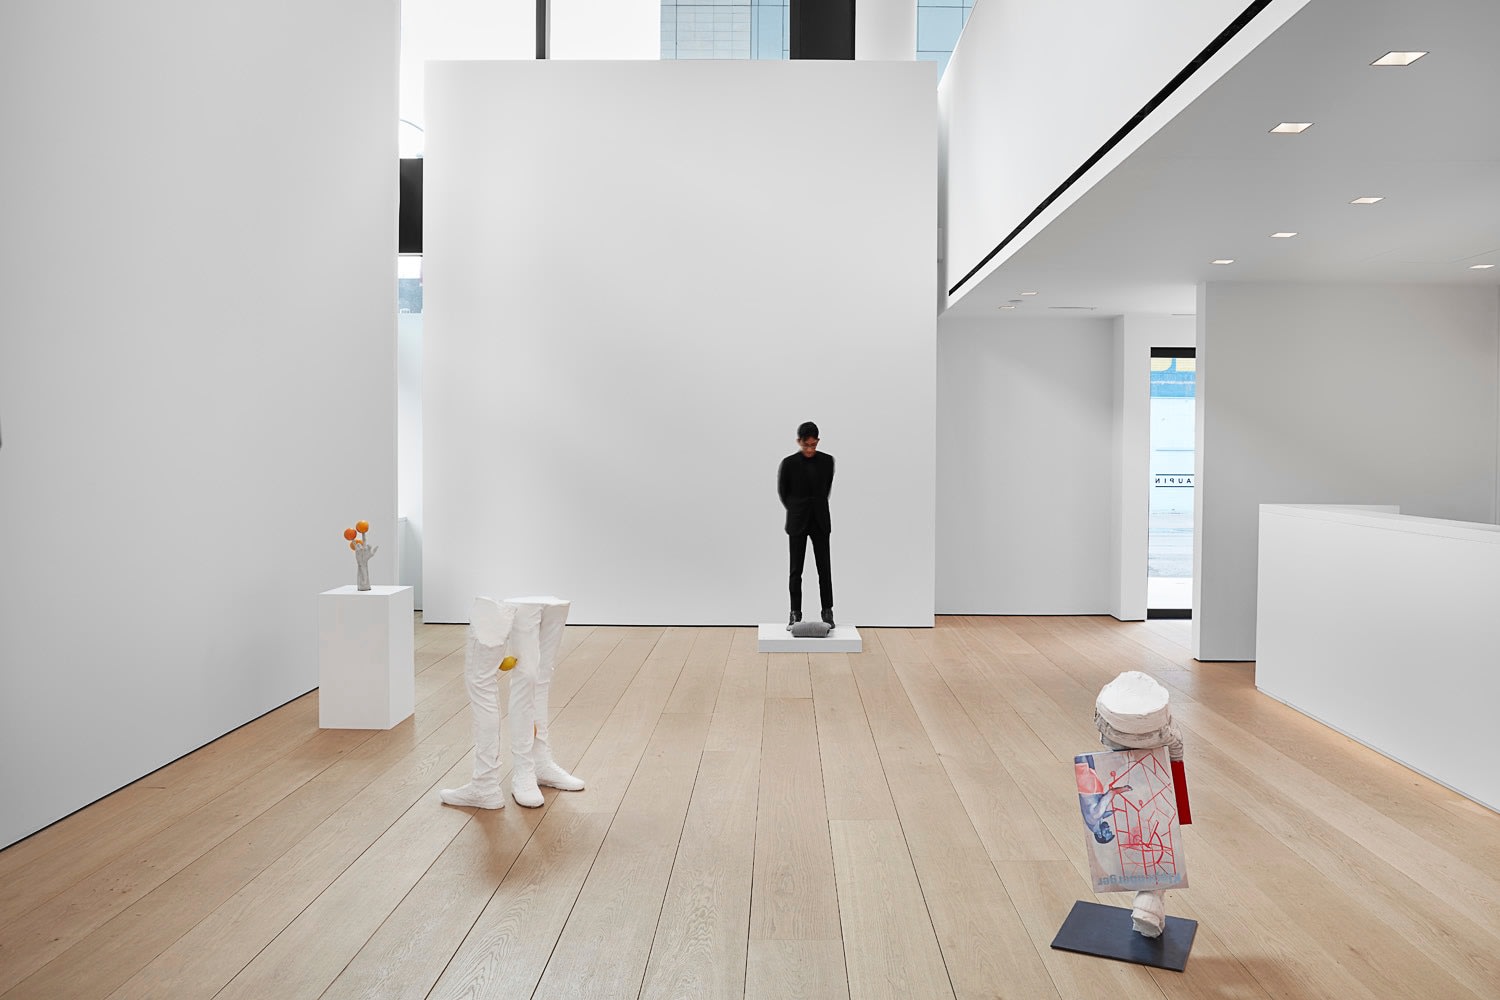 Installation view of Erwin Wurm's exhibition Yes Biological at Lehmann Maupin, New York, 2020, View 4